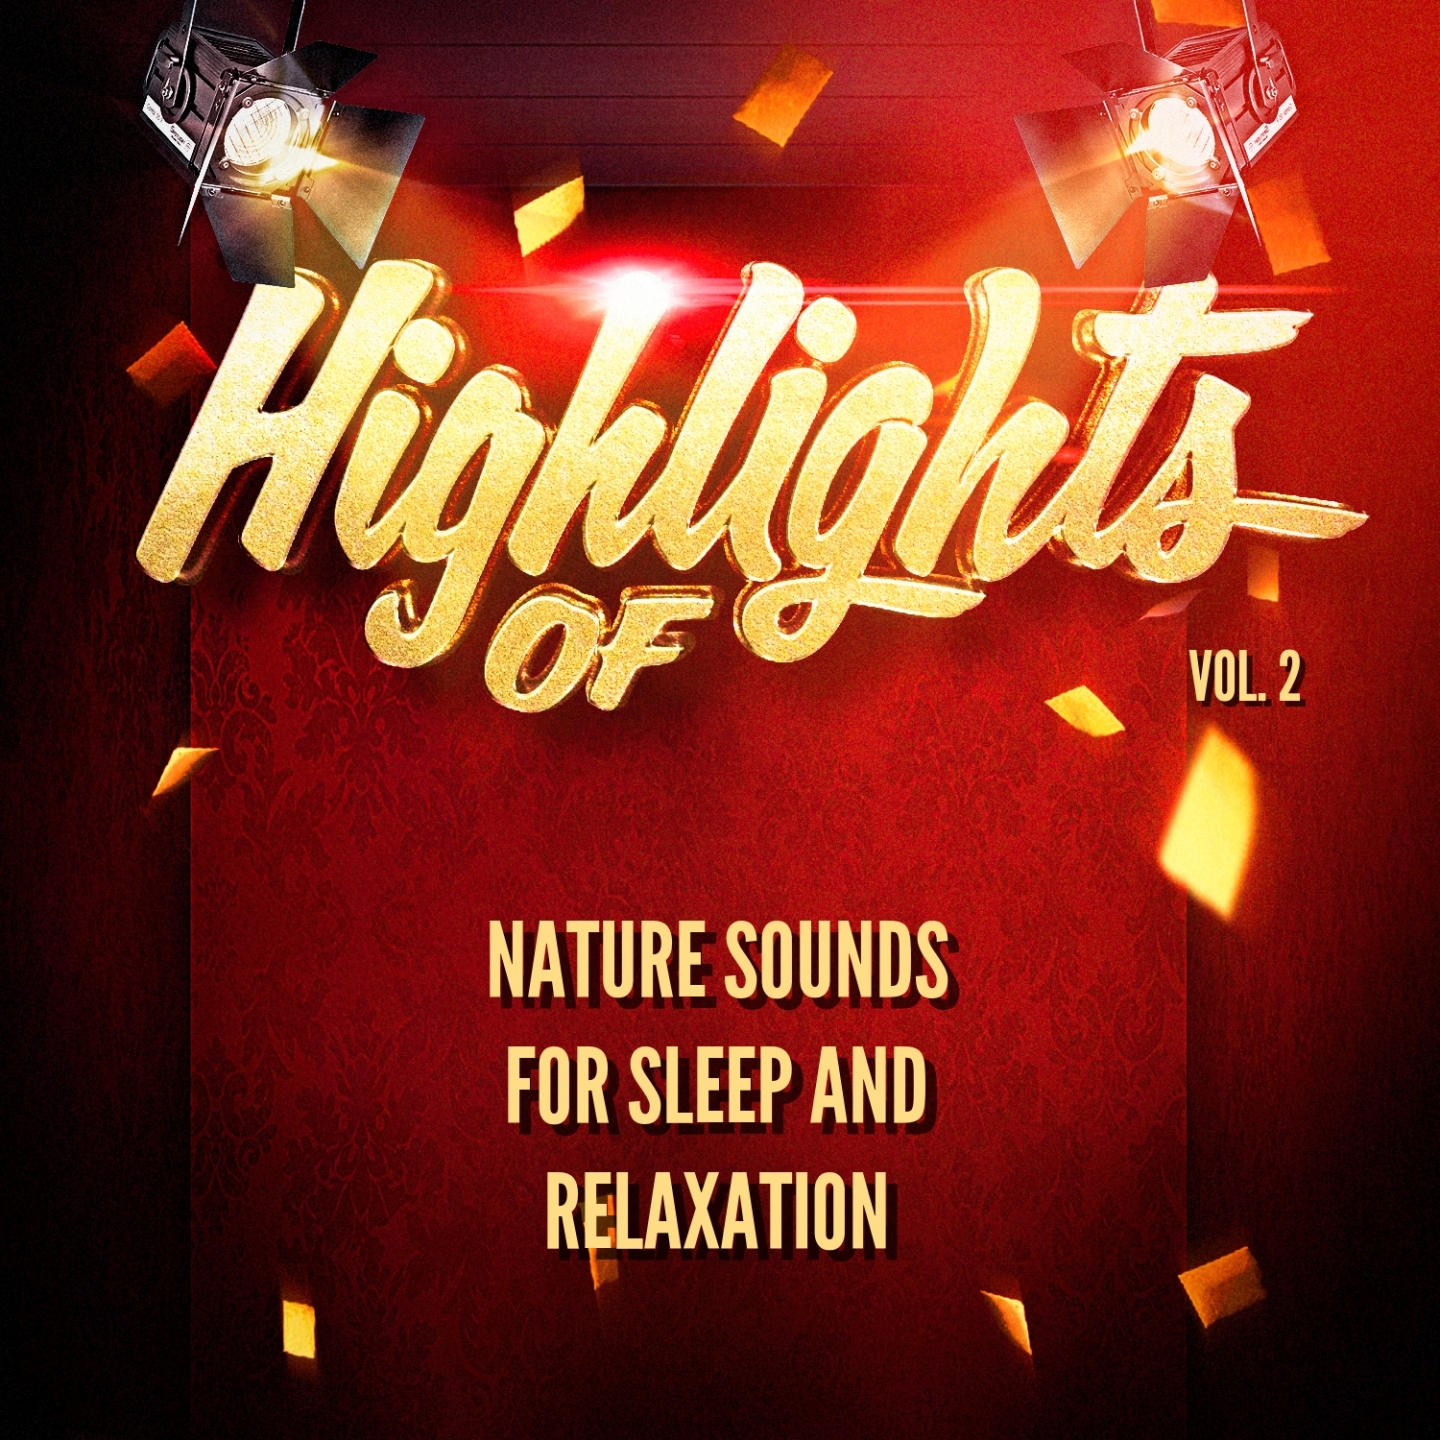 Highlights of Nature Sounds for Sleep and Relaxation, Vol. 2